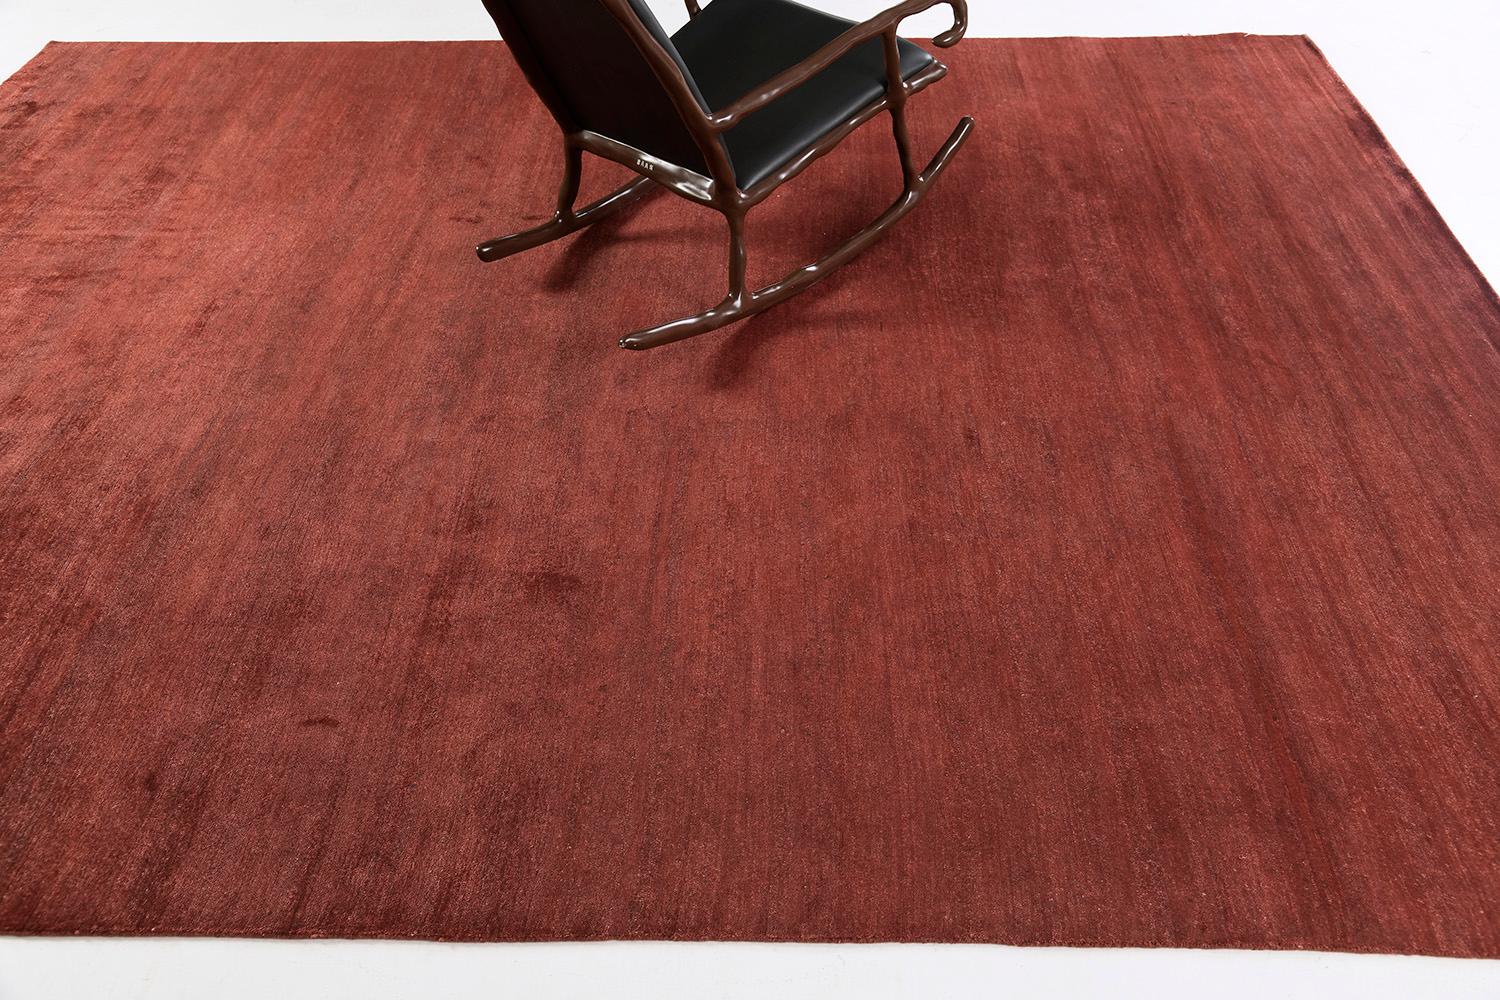 Dara' is a sought-after rug in the Elan Collection in the mesmerizing shade of ruby red. Its simplicity does not take away from the rug's luxurious quality and beautiful sheen made of bamboo silk. Dara is a fabulous rug for any design